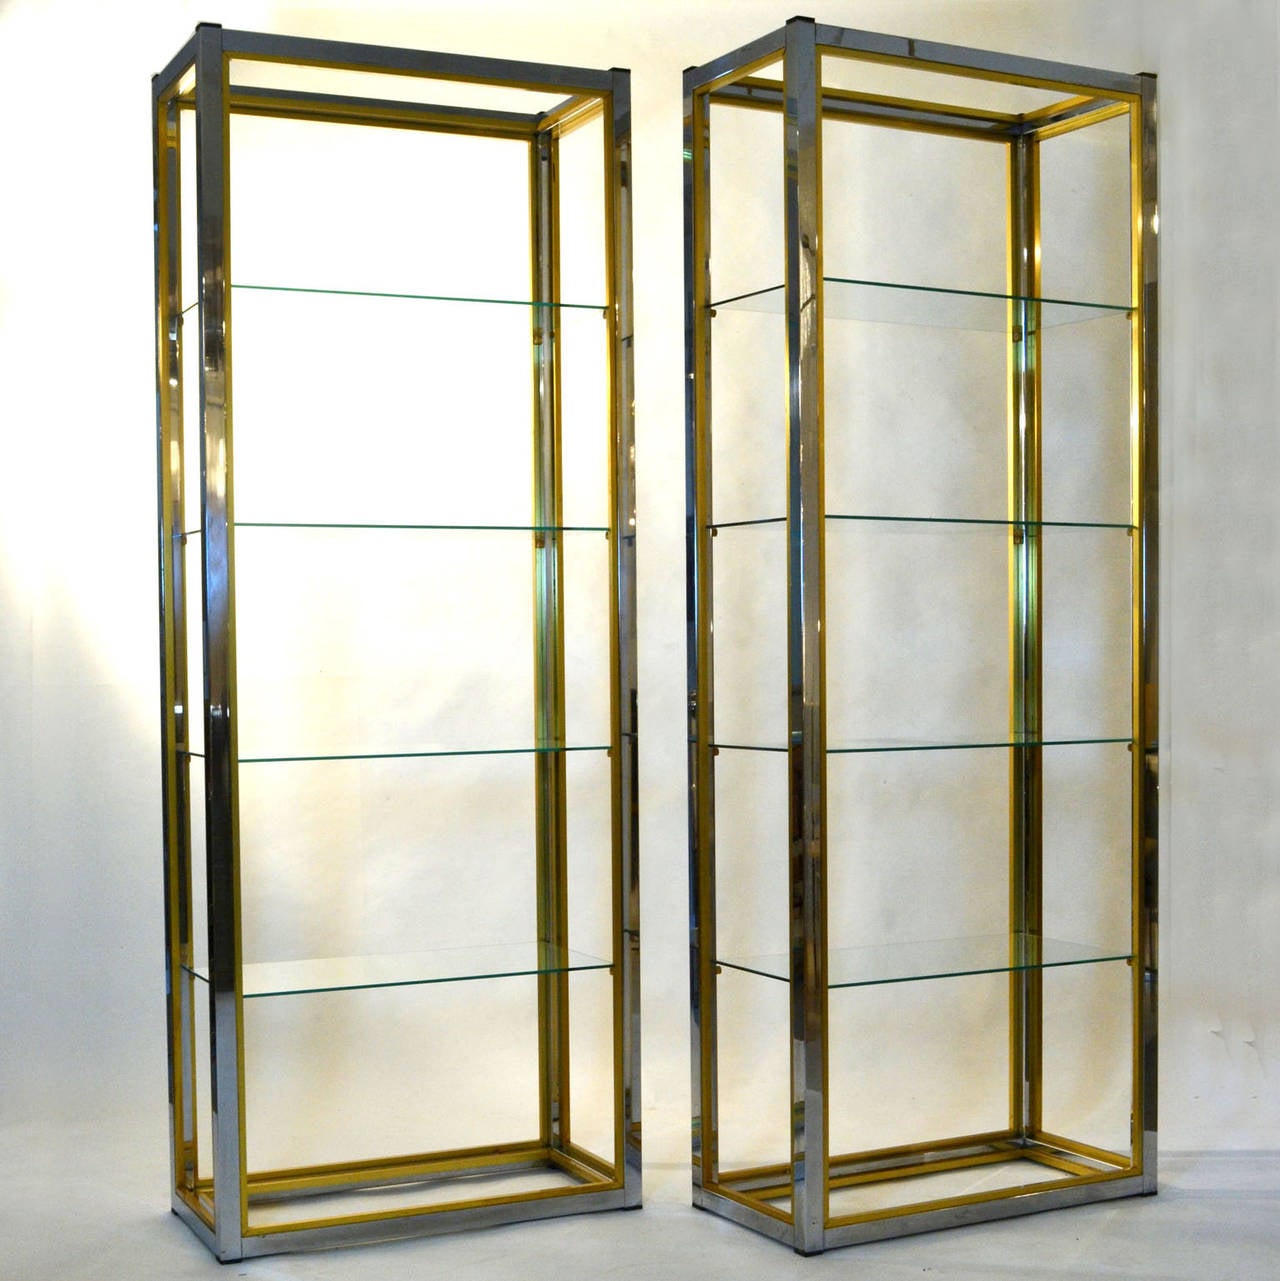 Two rectangular freestanding minimal shelving units are designed with a chrome outer frame and a brass inner frame. They have clear glass shelves.